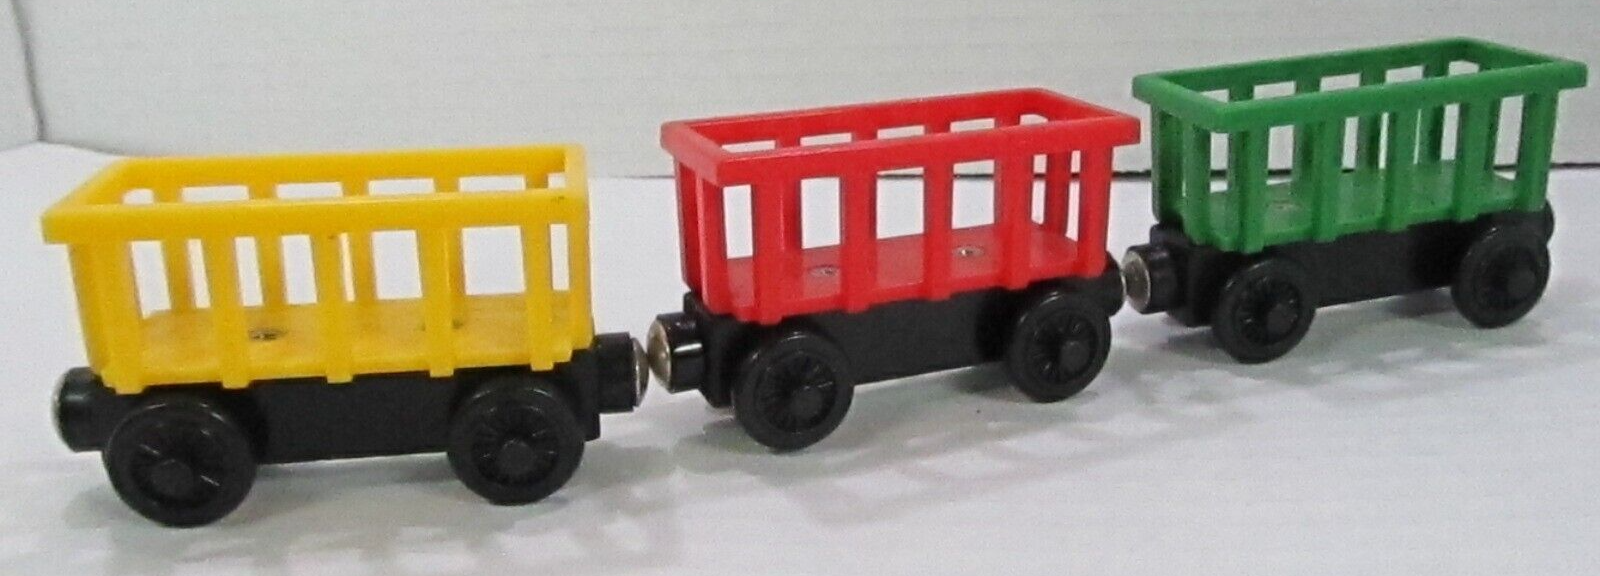 Primary image for Thomas the Train Wooden Railway Red Yellow Green Circus Train Car Lot of 3